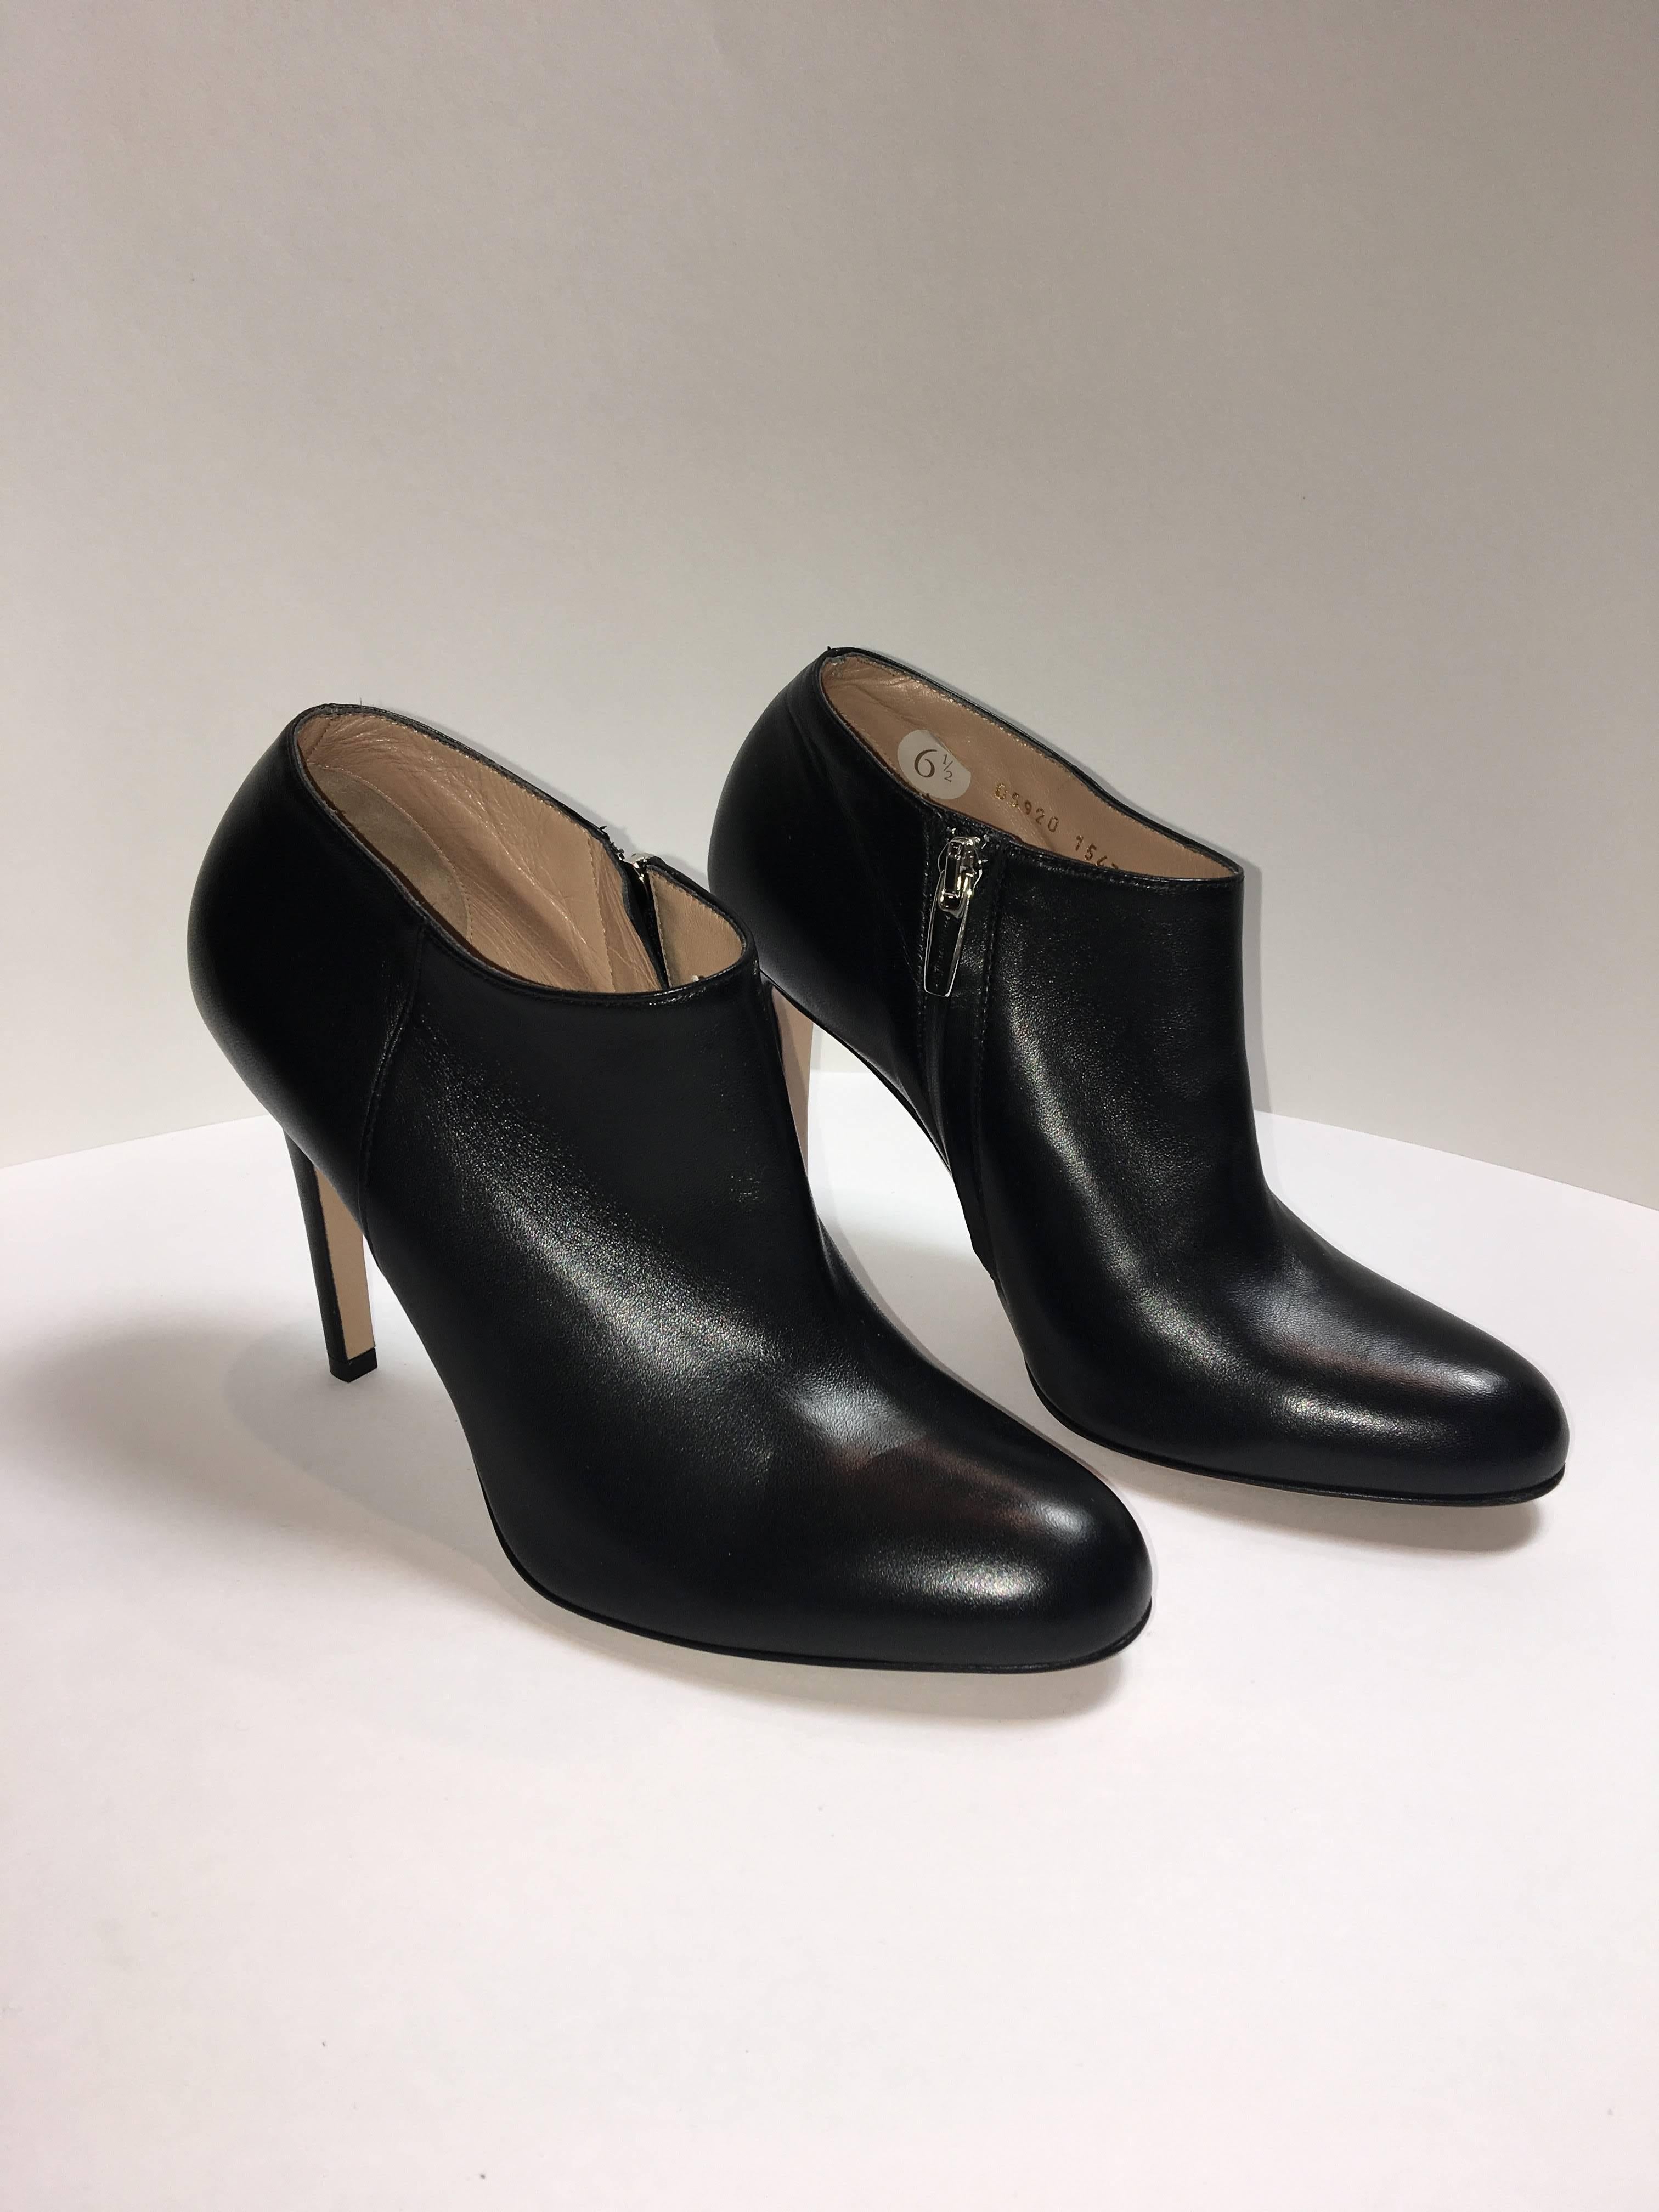 Below-the-ankle Booties with 4" Heel. Black leather in size 36.5.